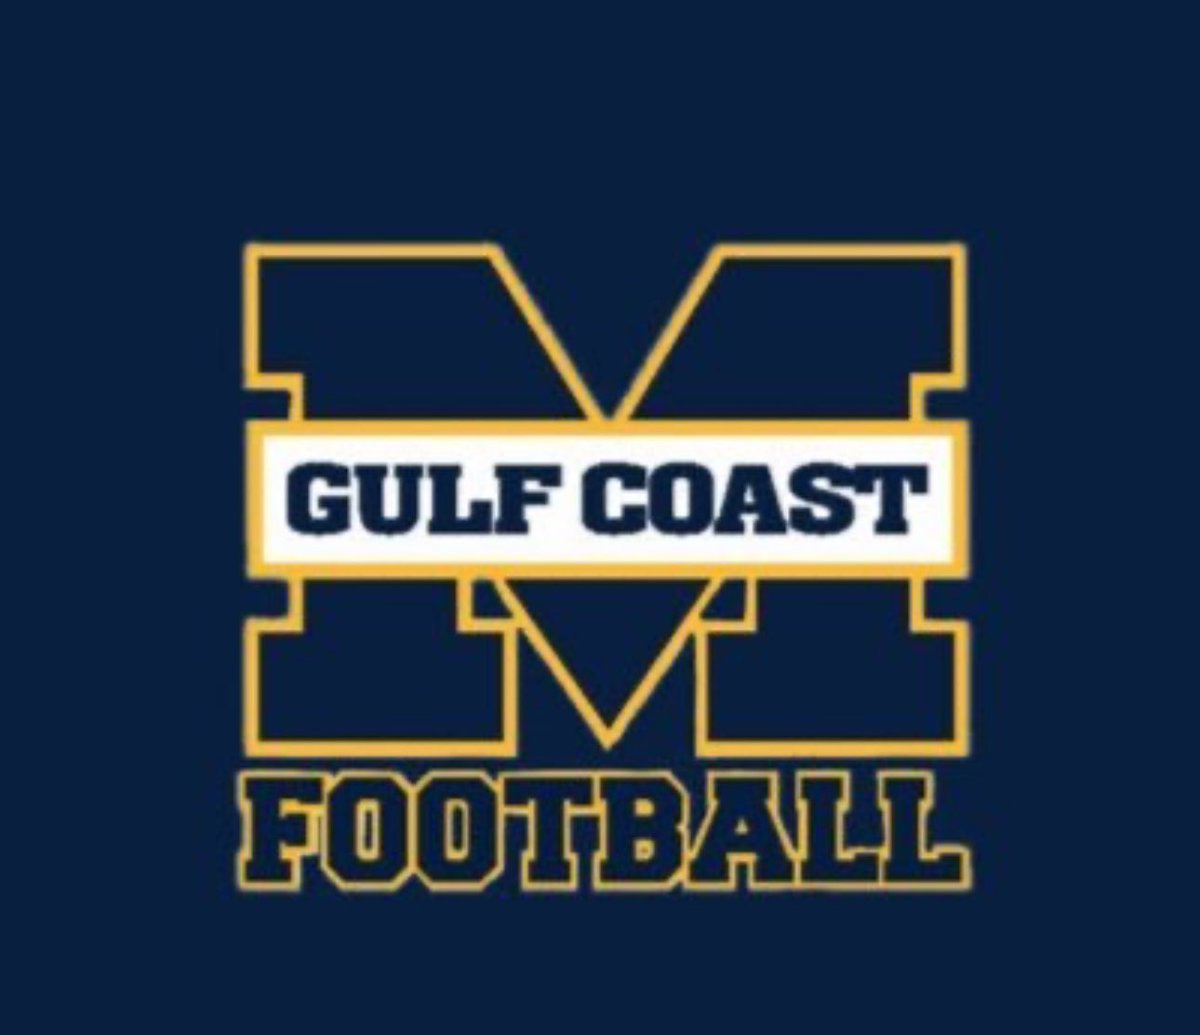 #AGTG After a great conversation with @rsmem32_rod I am blessed to receive my 2nd offer from mississippi gulf coast community college @CoachDavis93 @CoachLampley1 @CourseLlc @caesarchuck @Born2BallAth @True_Wisdom_93 @Coach_Bramlett